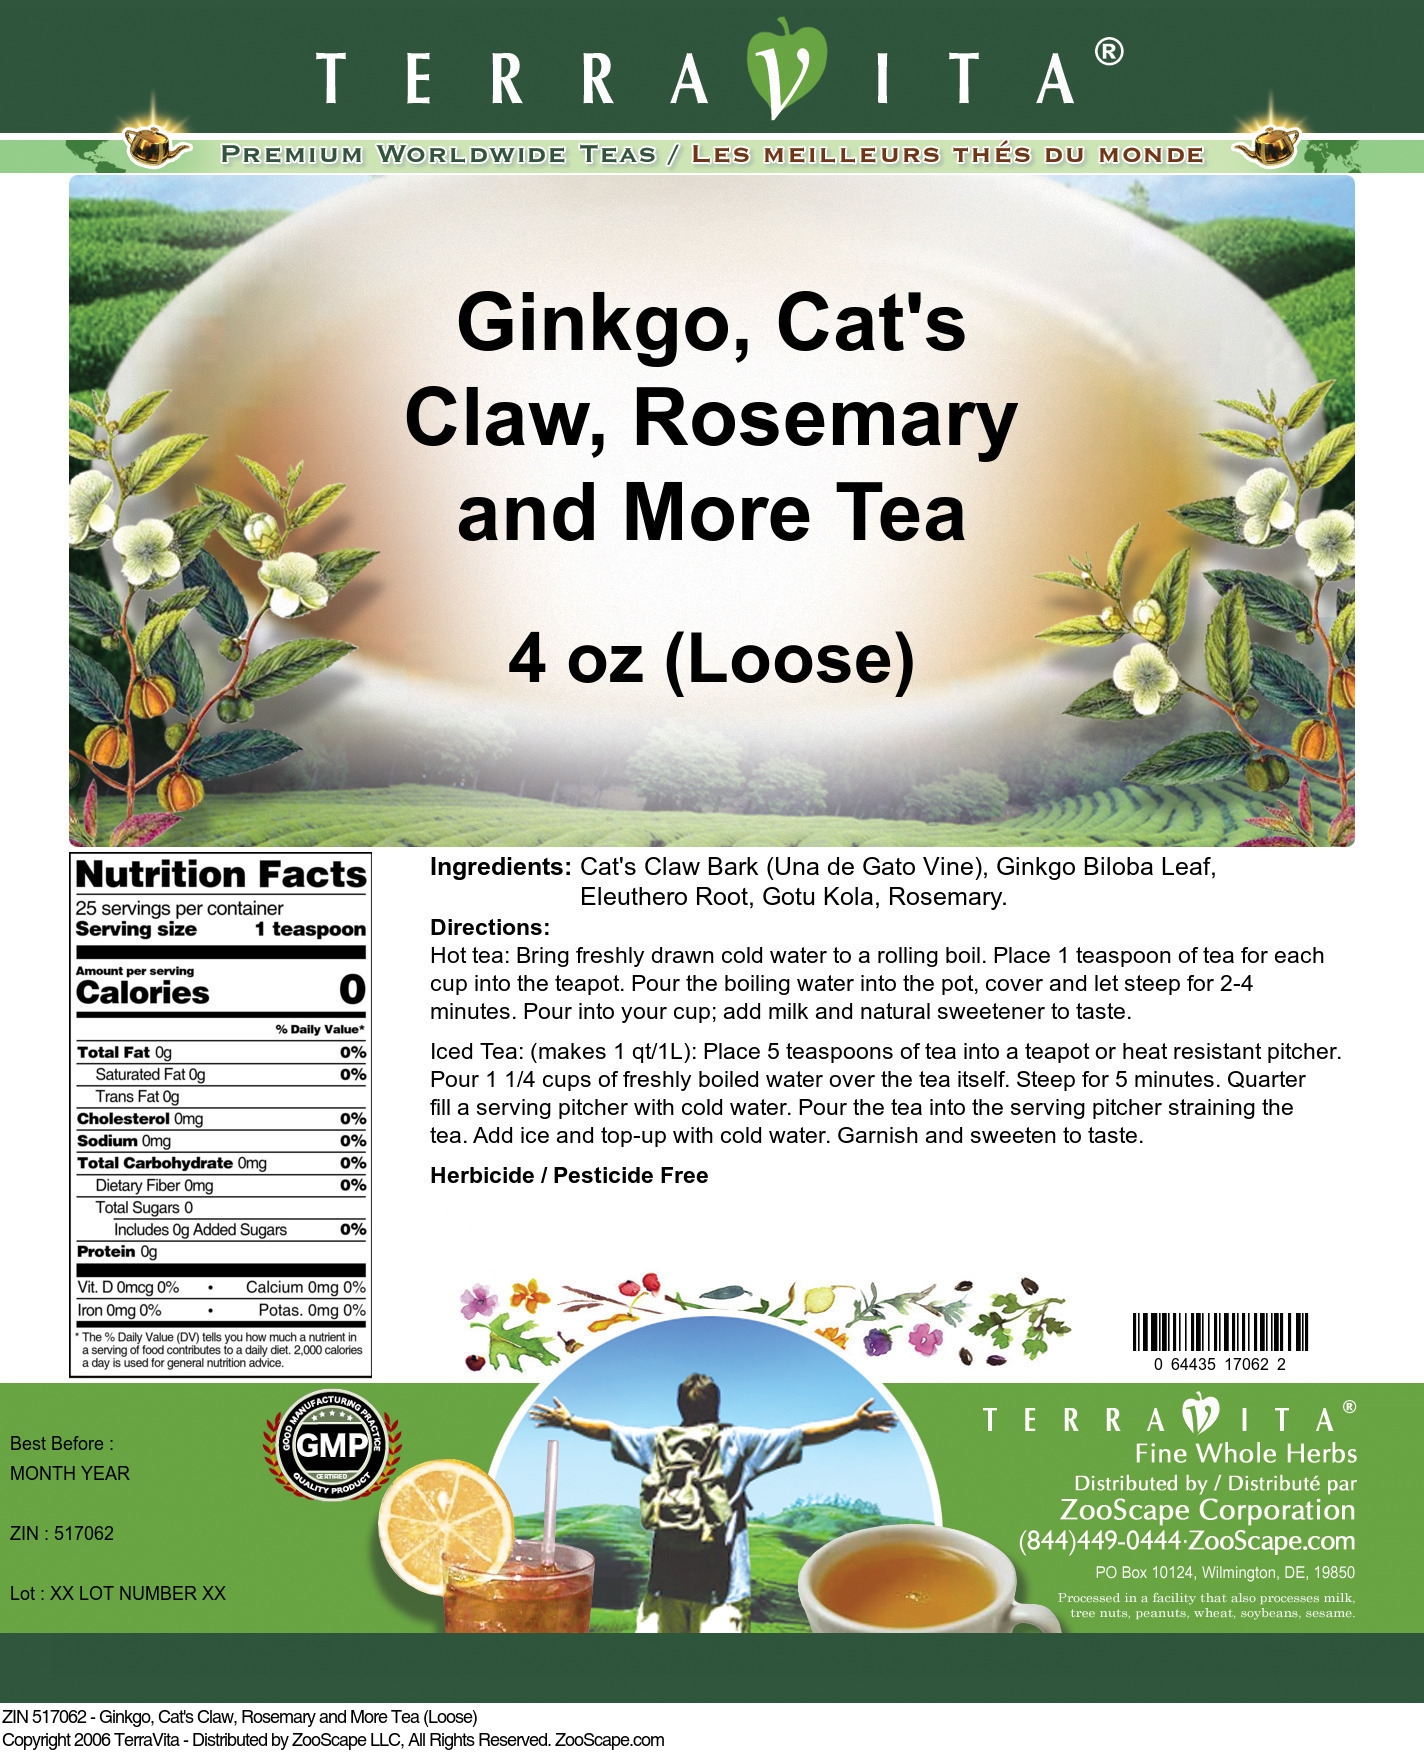 Ginkgo, Cat's Claw, Rosemary and More Tea (Loose) - Label